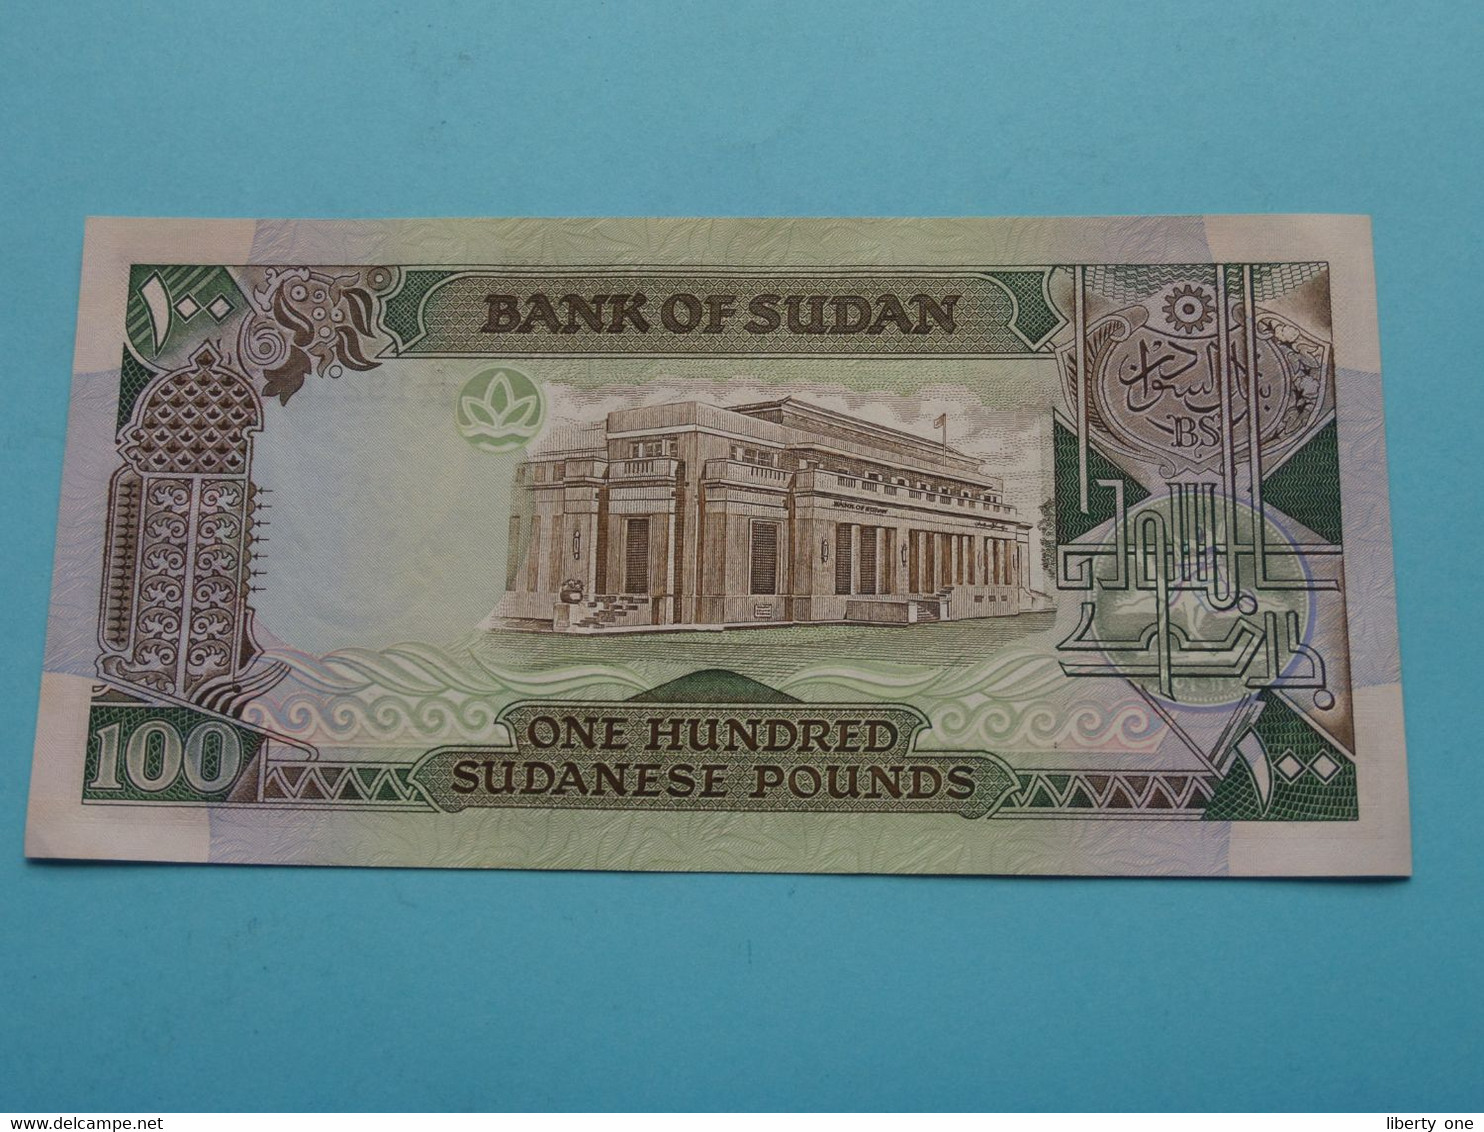 100 One Hundred Sudanese Pounds ( H/64 192185 - 1989 ) Bank Of SUDAN ( For Grade, Please See Photo ) UNC ! - Soudan